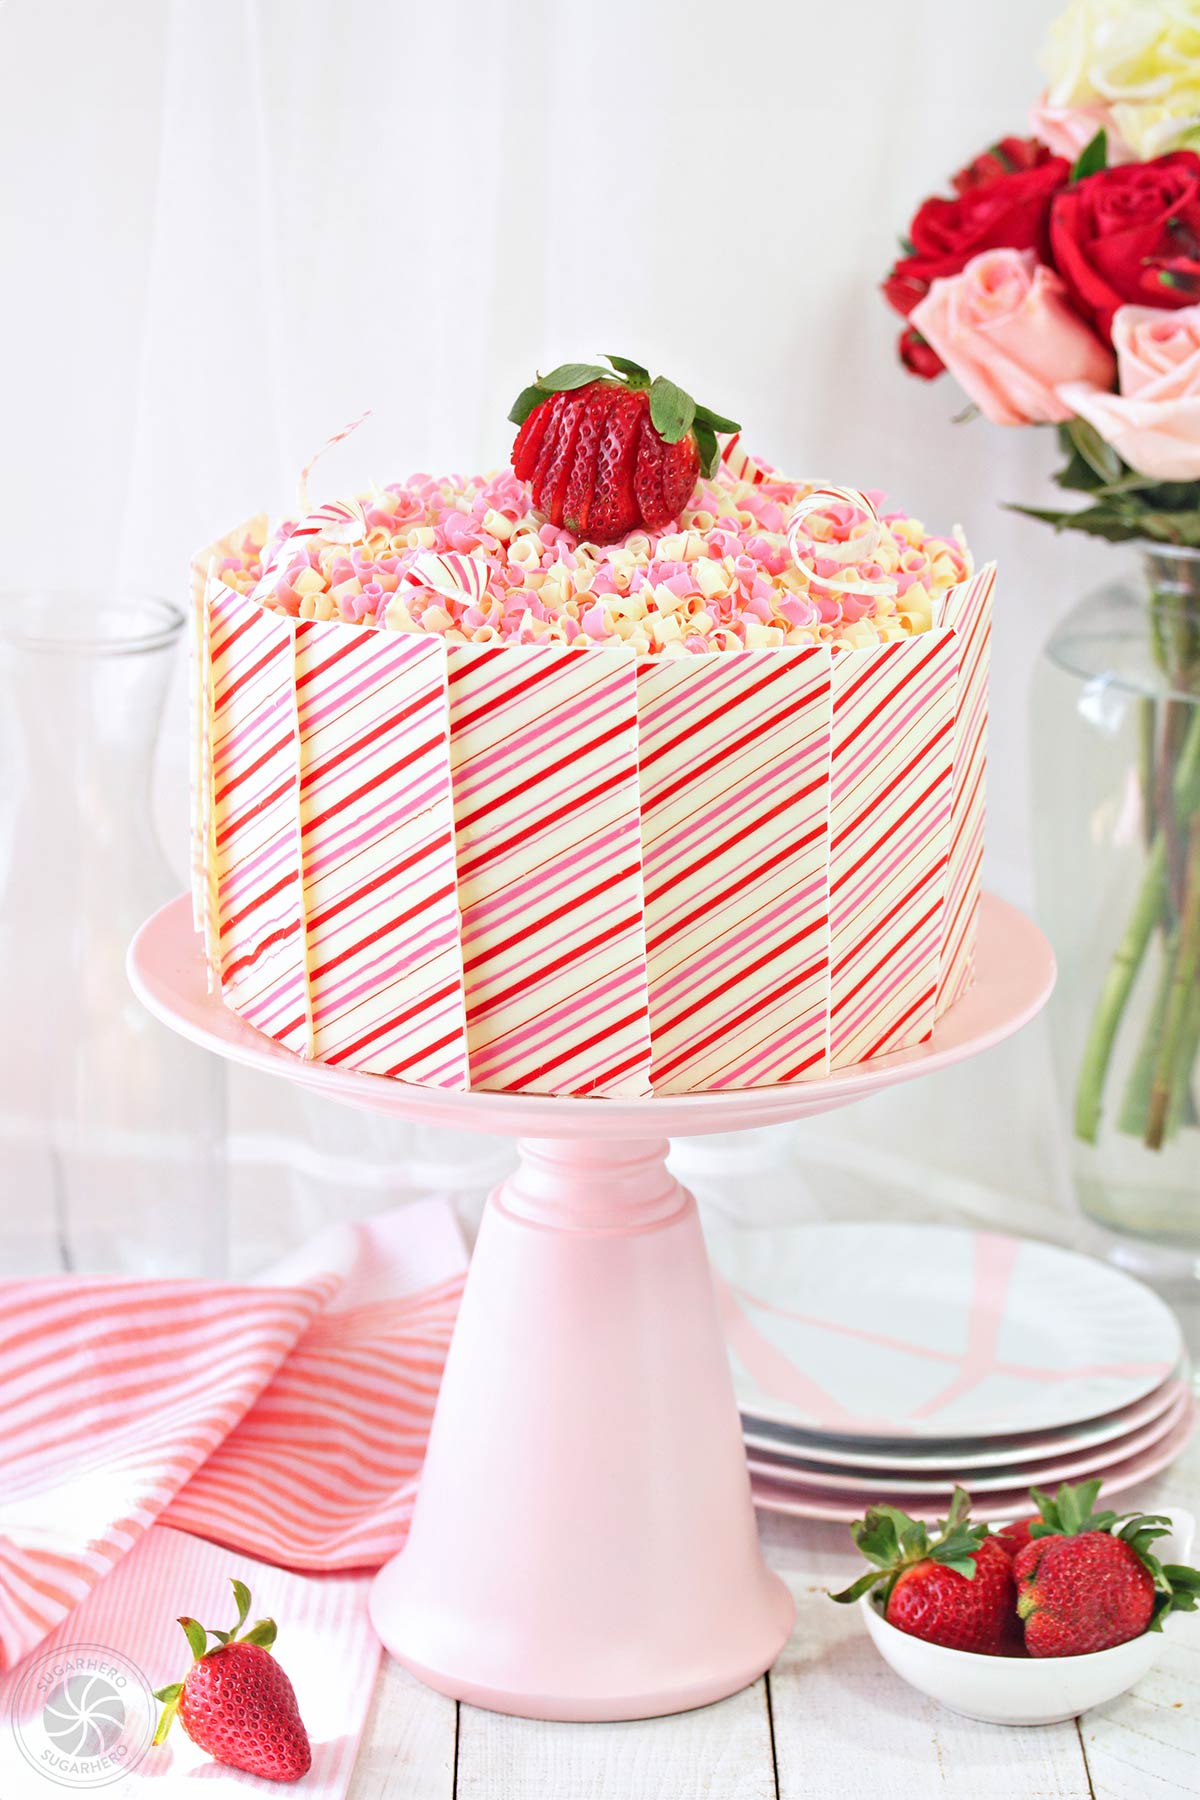 Send Delight Of Strawberry Cake To Japan